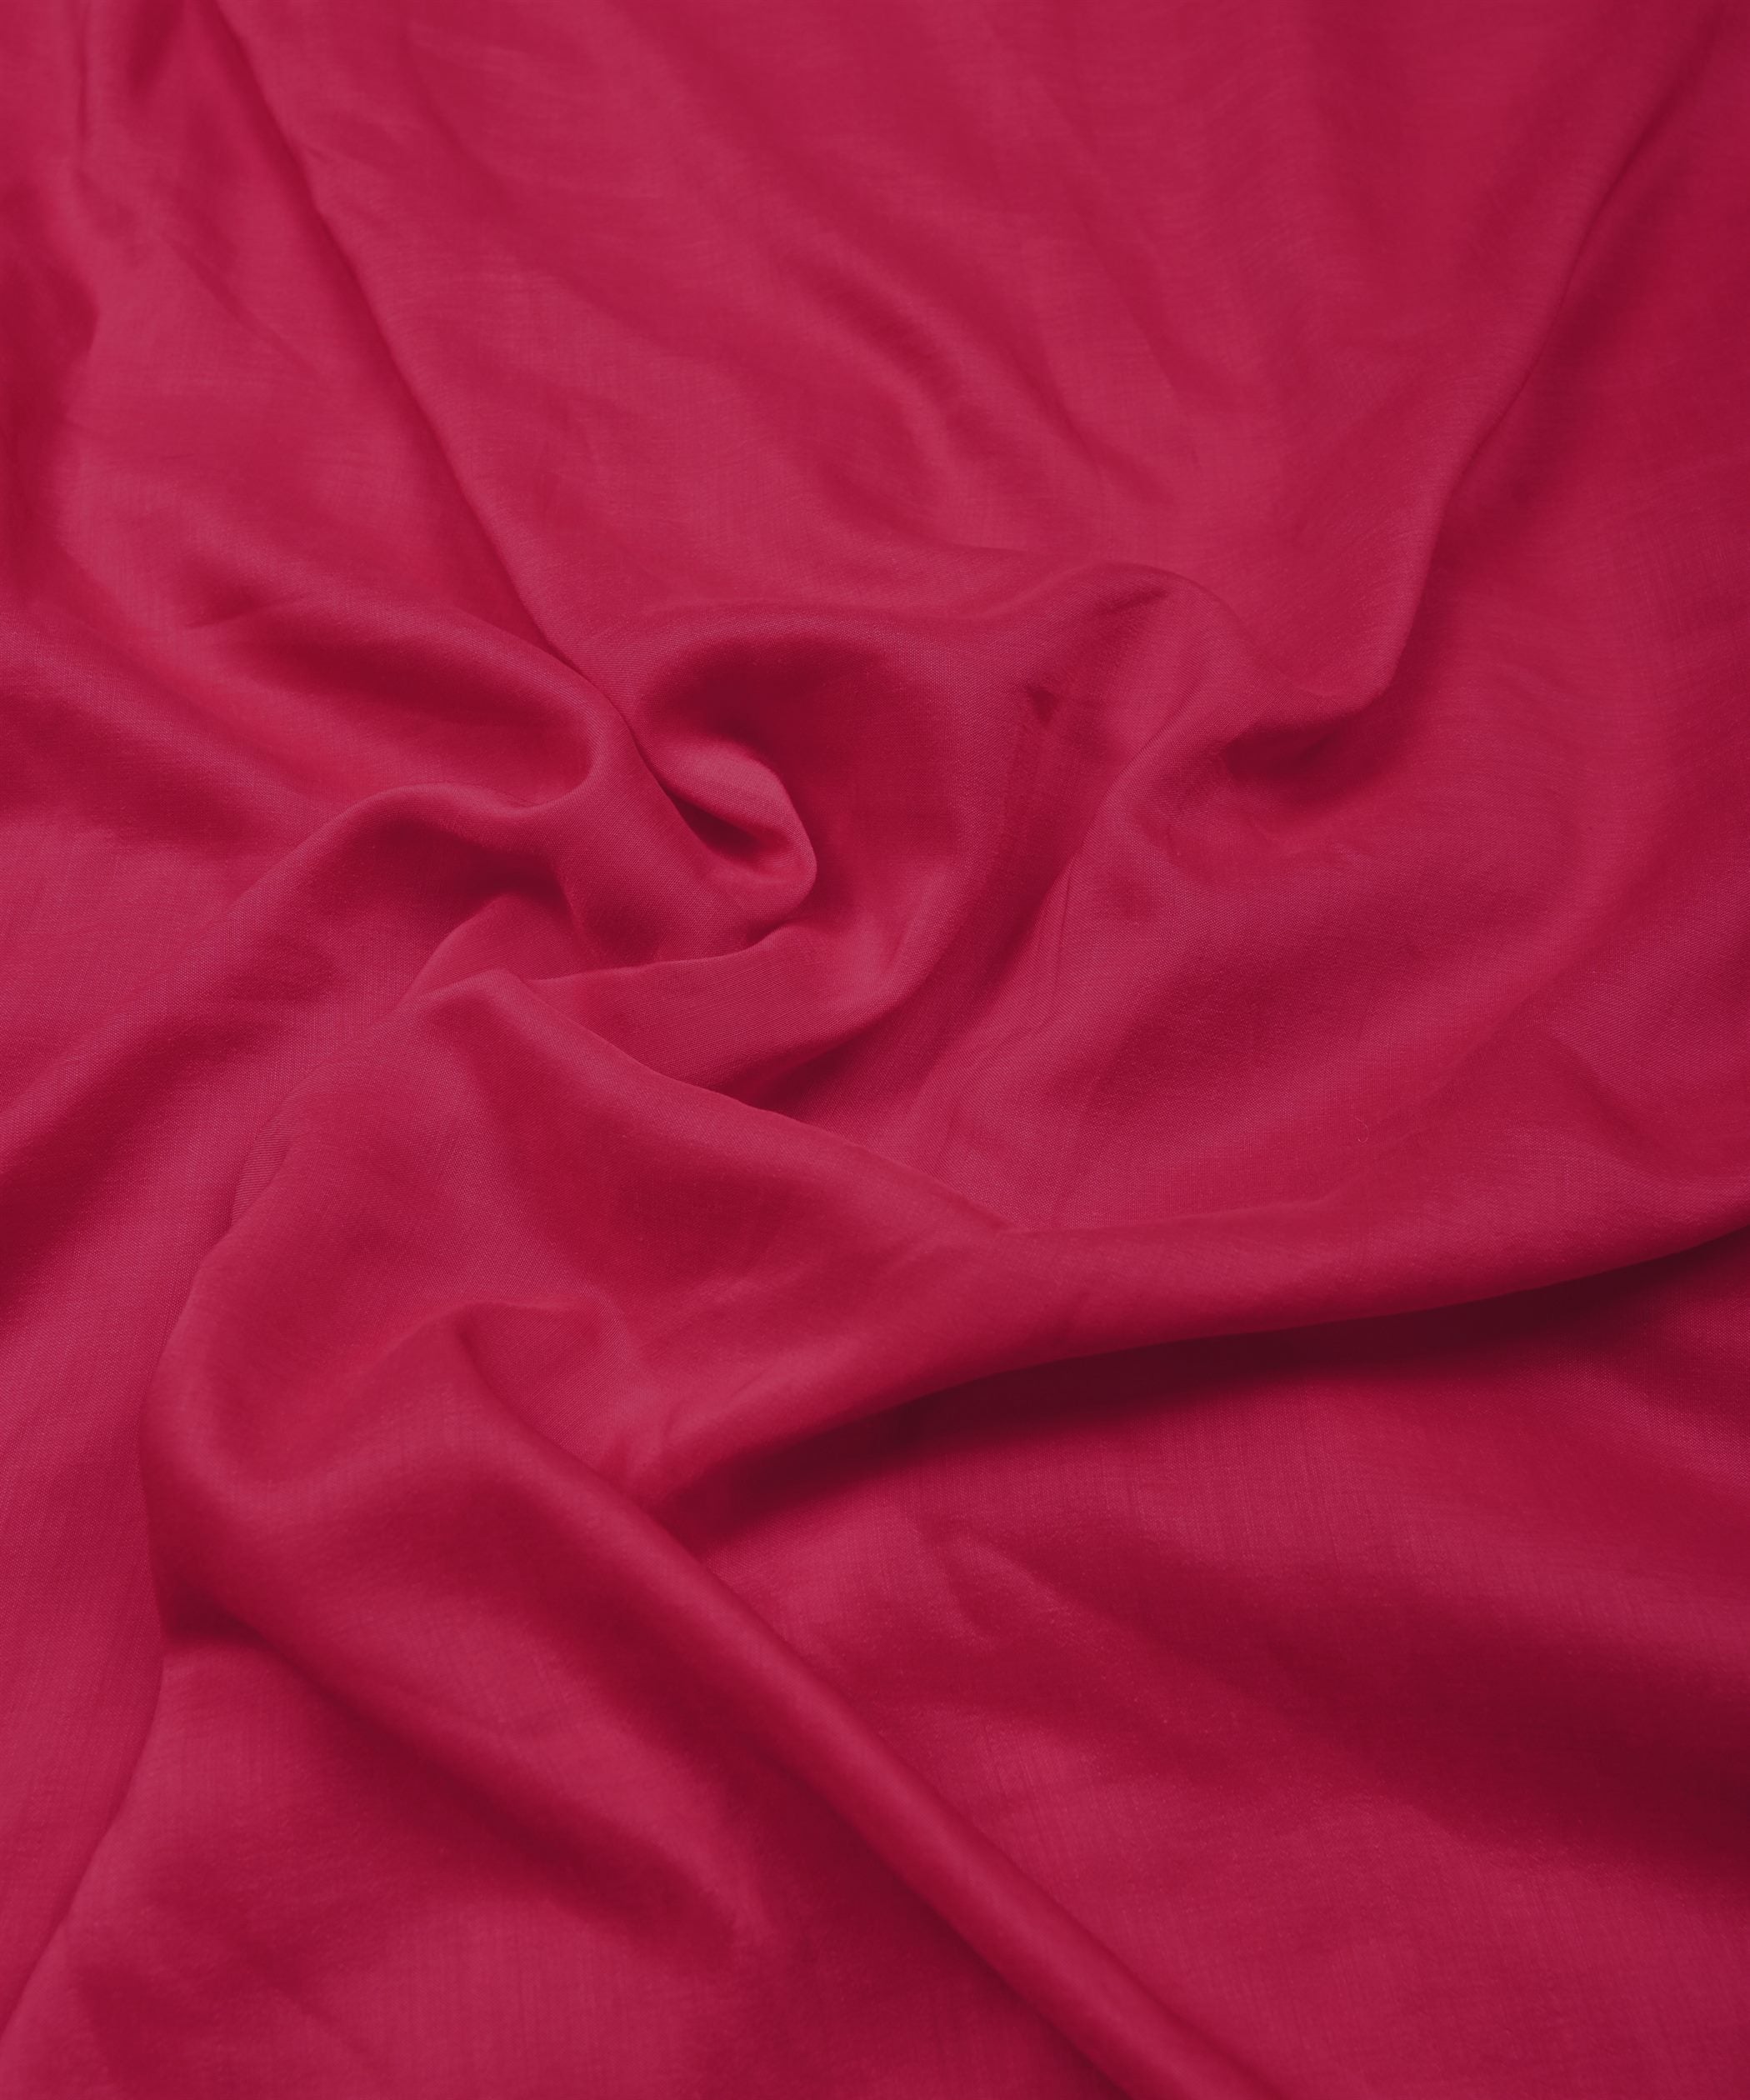 Hot Pink Plain Dyed Polyester Muslin Fabric